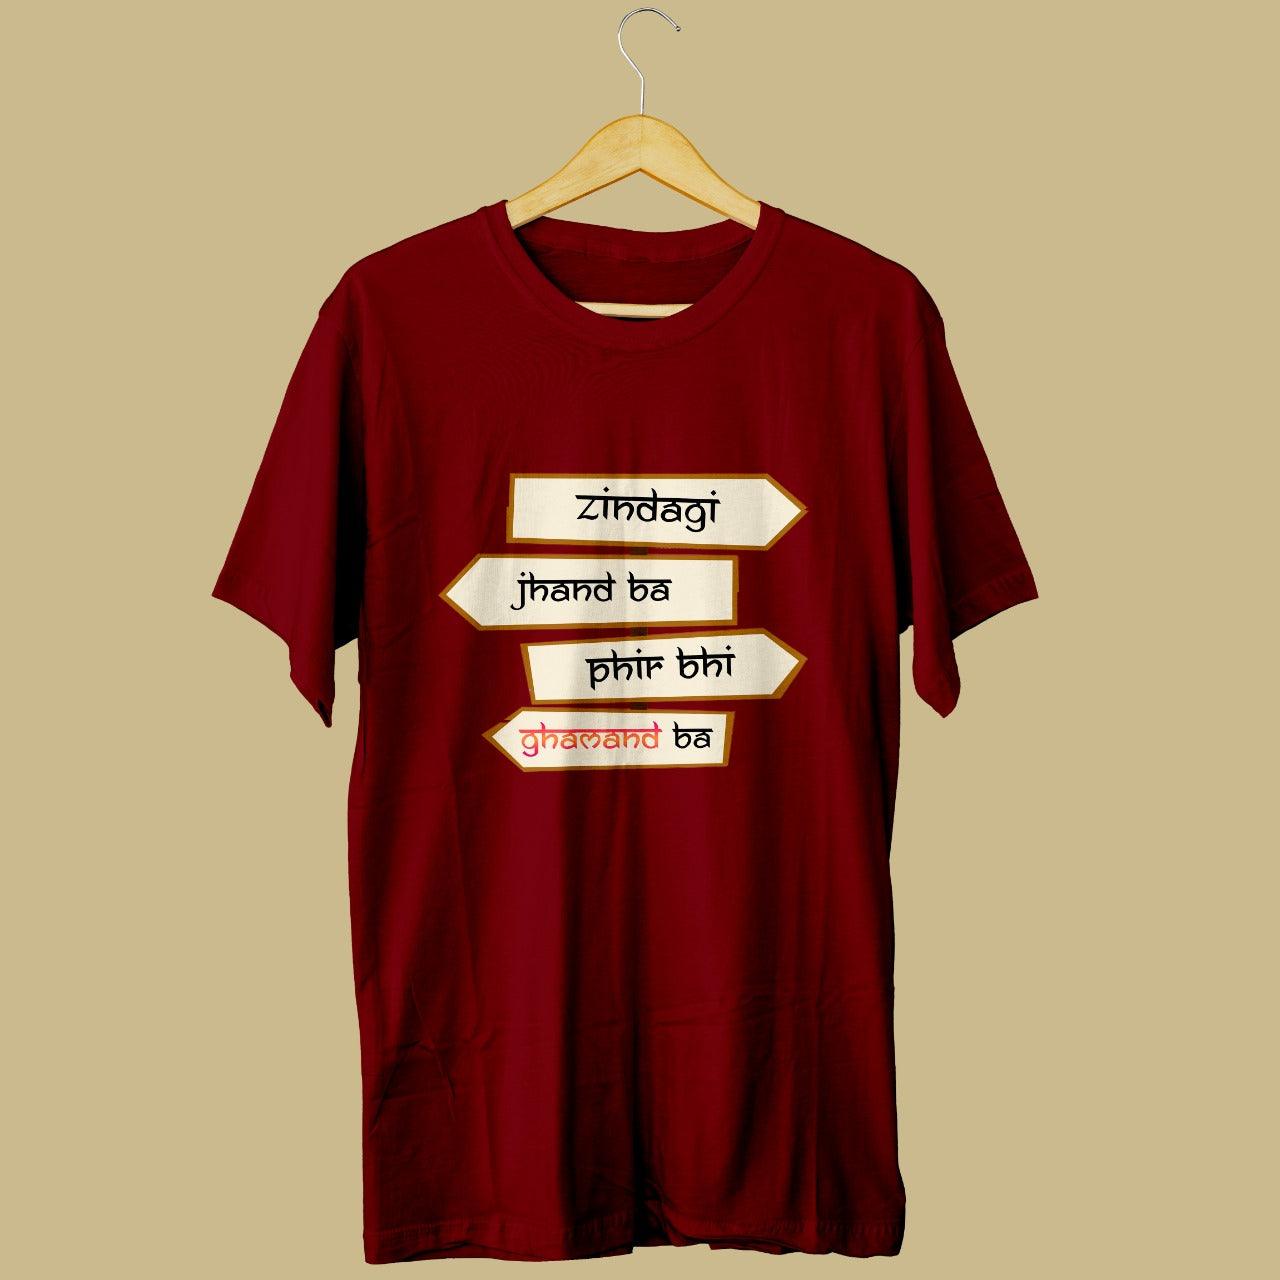 Looking for a stylish maroon t-shirt that reflects your attitude towards life? Check out our round neck t-shirt made from high-quality cotton, featuring the catchy tagline "Zindagi jhand ba phir bhi ghamand ba". Order now to experience the perfect blend of style, comfort, and attitude.